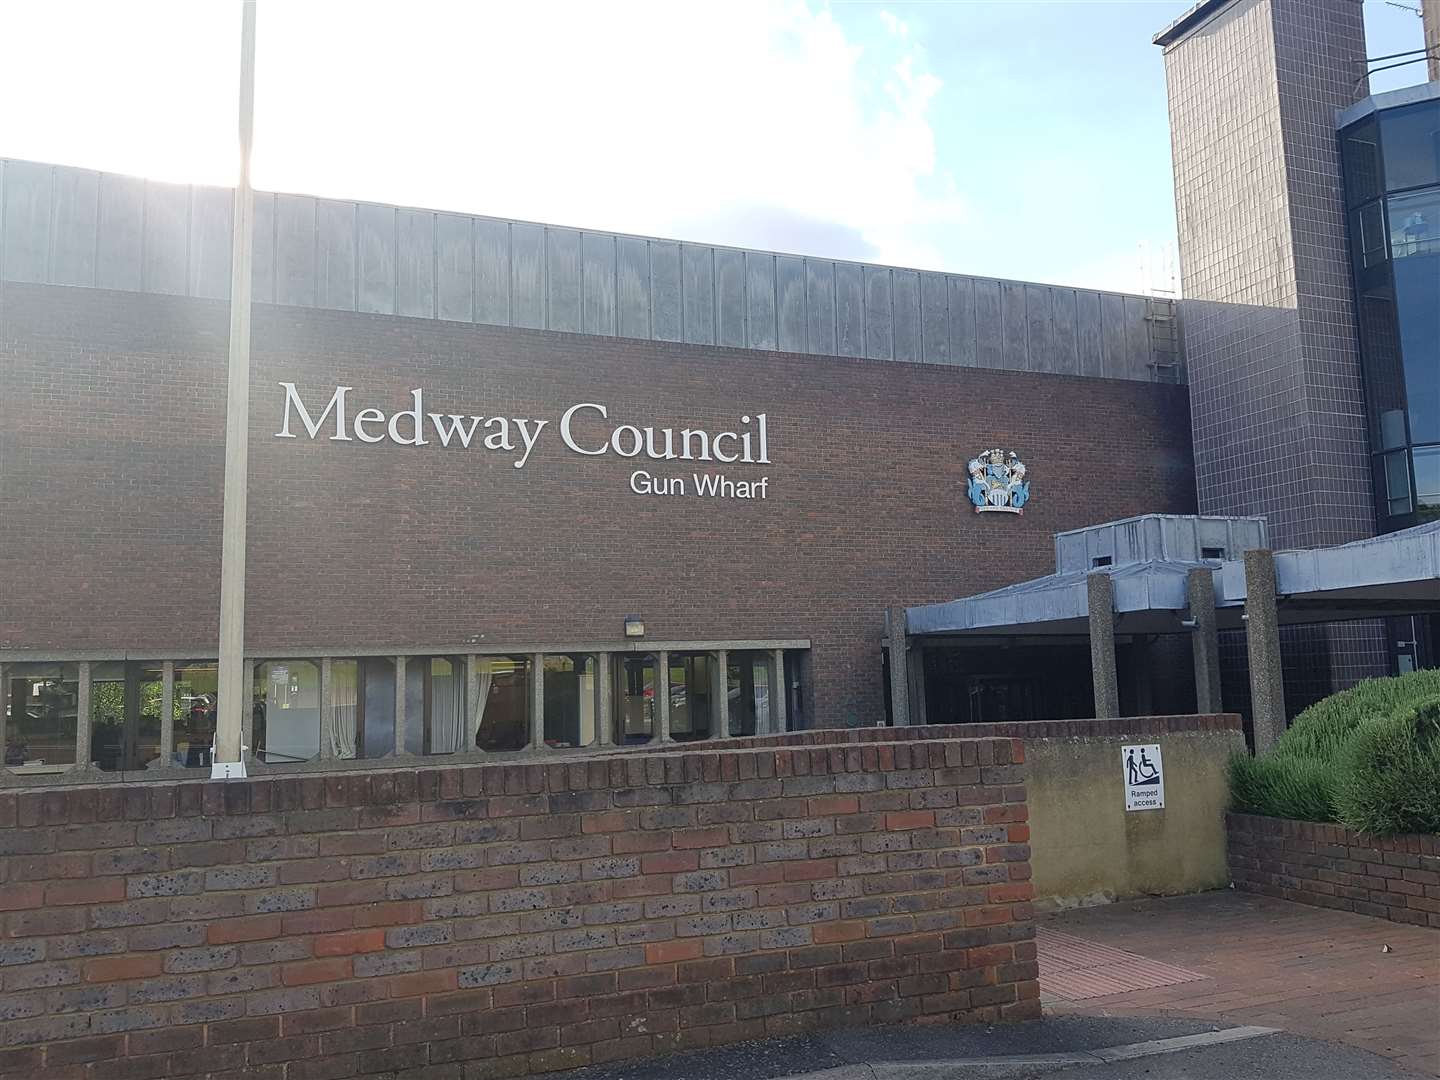 There is a 12.3% gender pay gap between male and female staff members at Medway Council